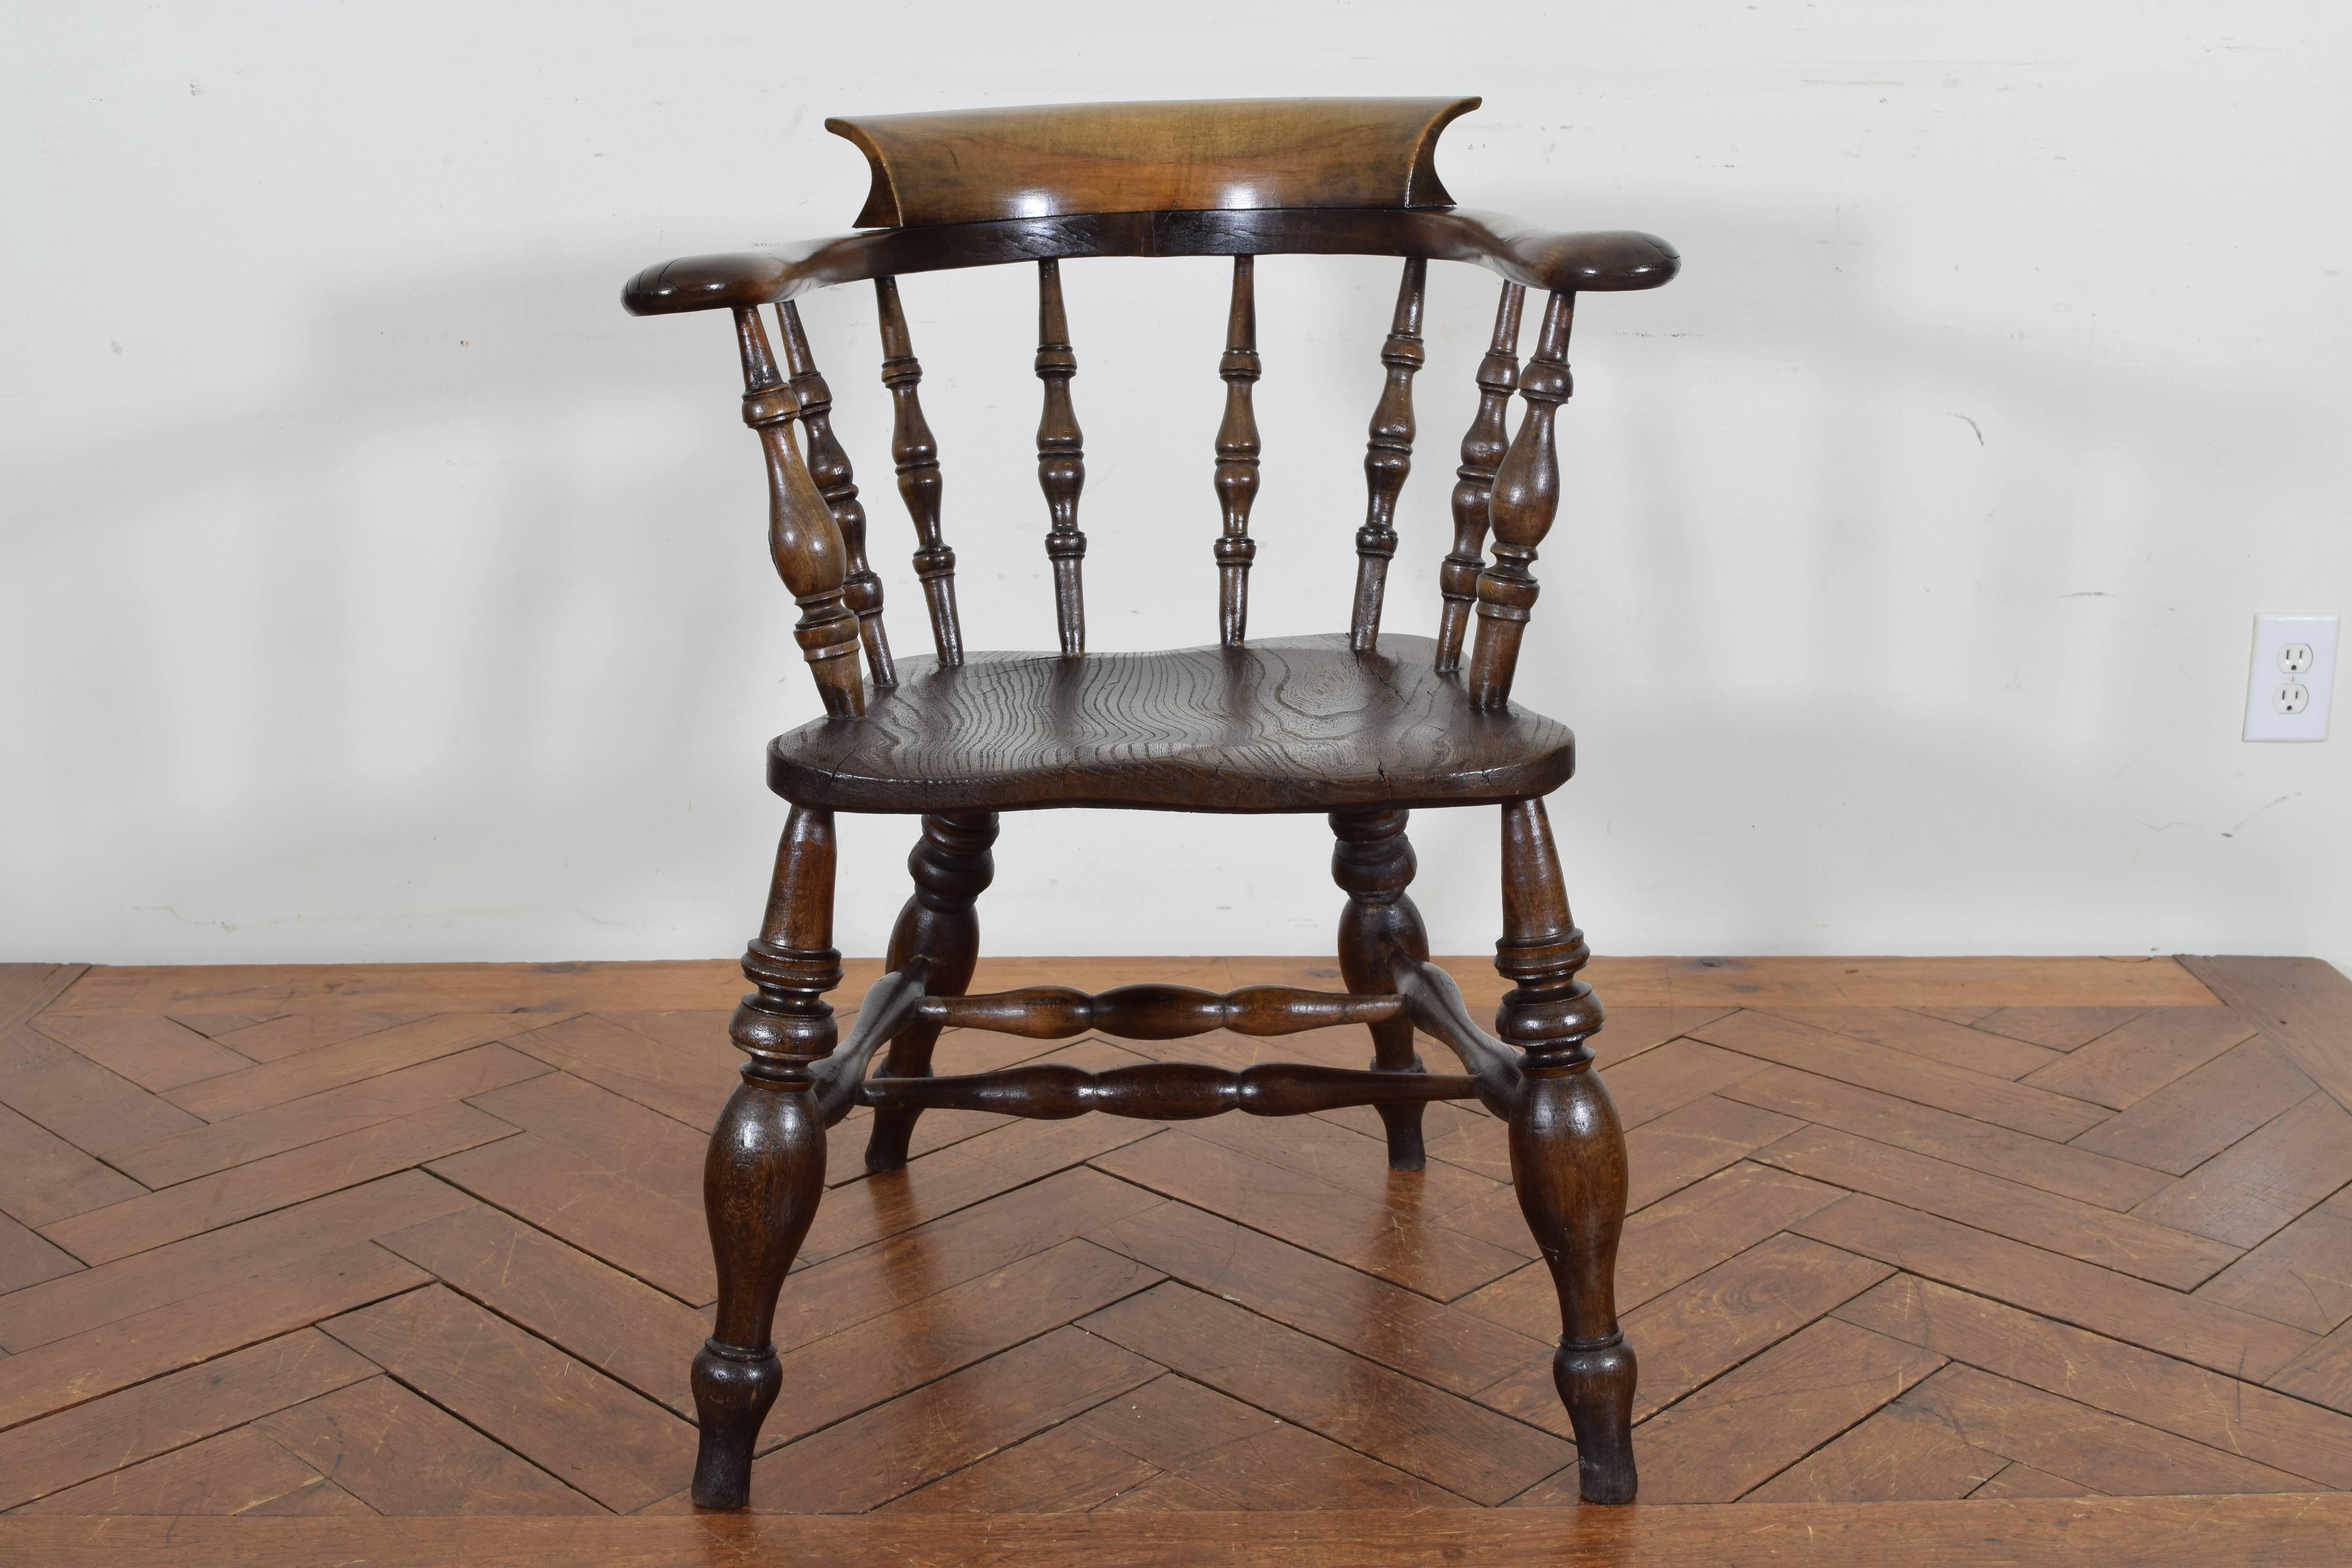 Having a curved back and upper backrest, the arms supported by turned spindles, the shaped seat above splayed turned legs joined by two stretchers.